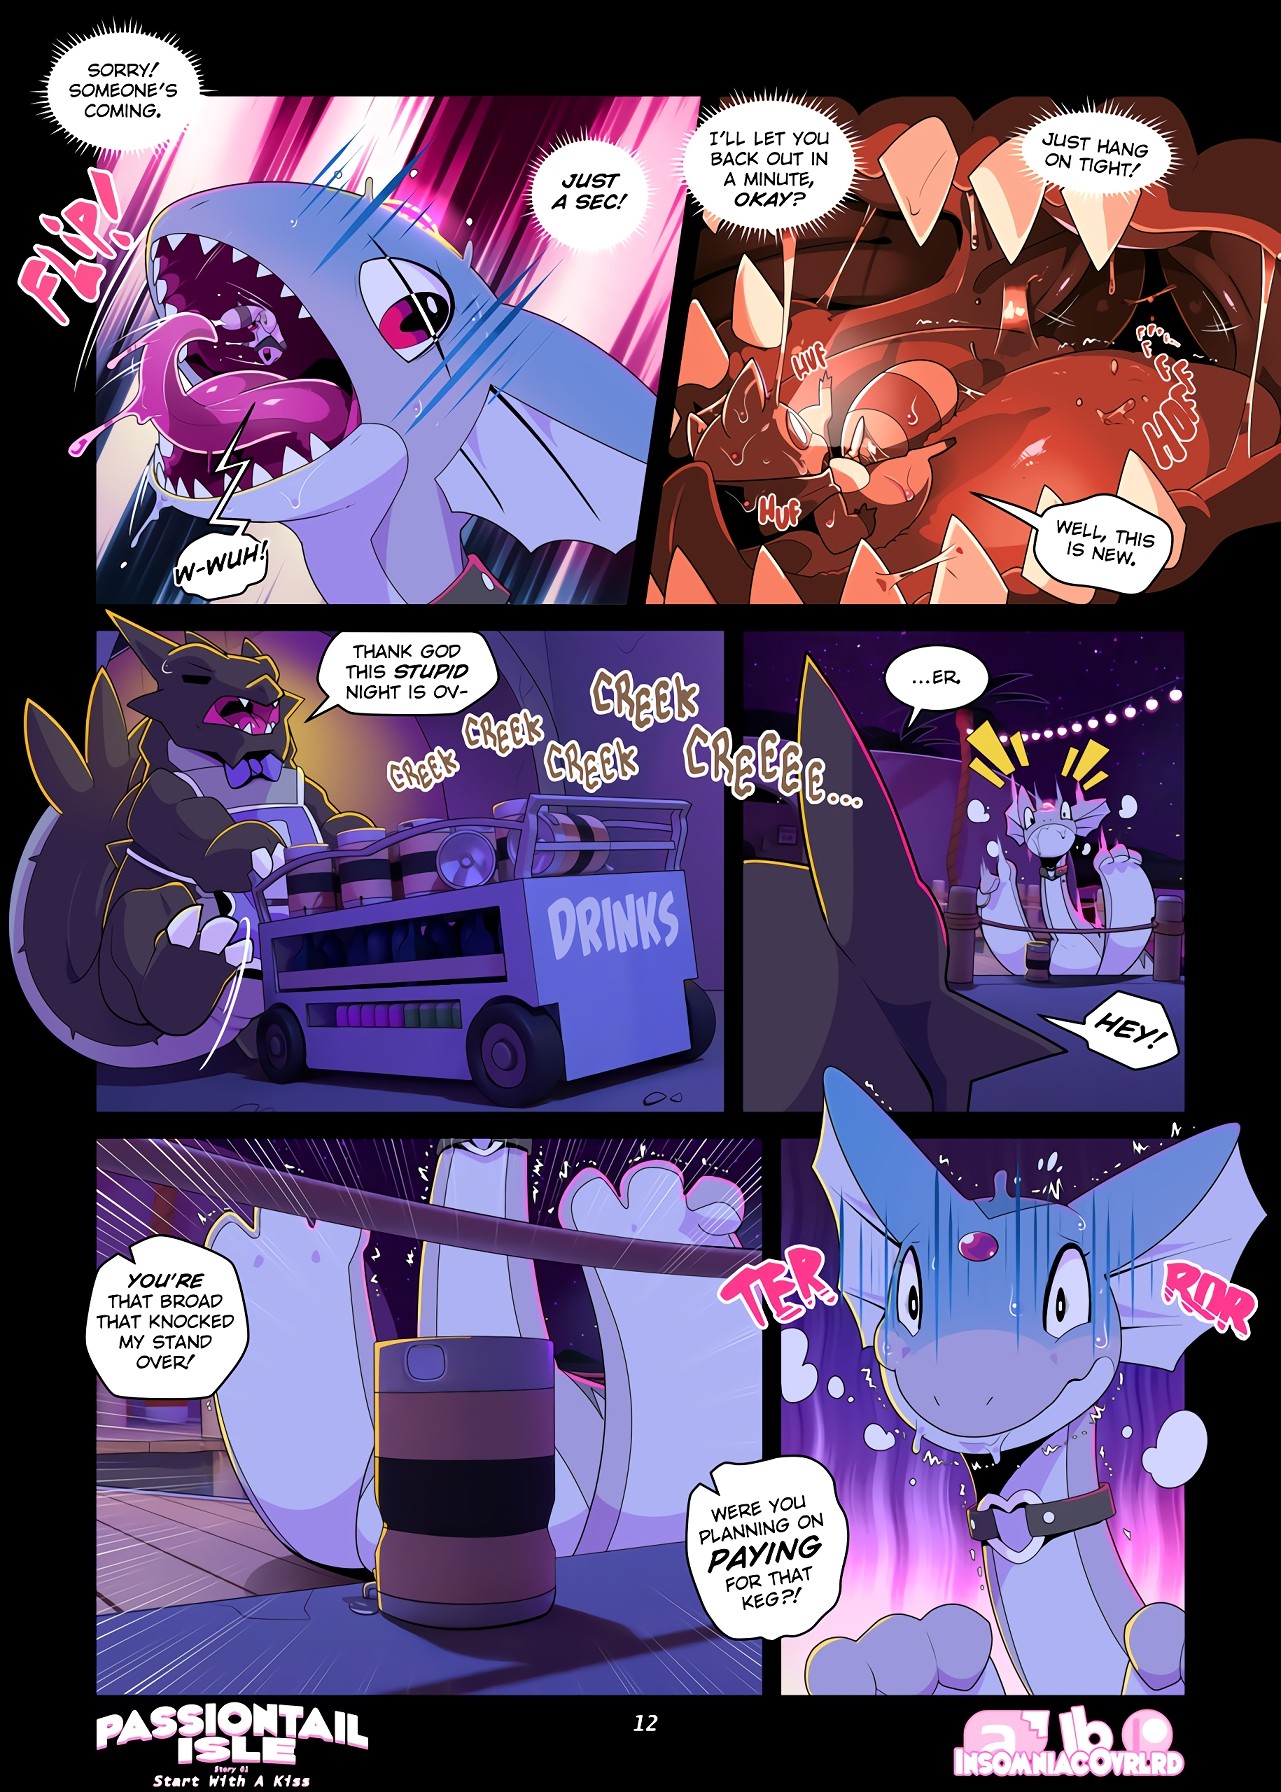 Passiontail Isle by Insomniacovrlrd porn comic picture 13